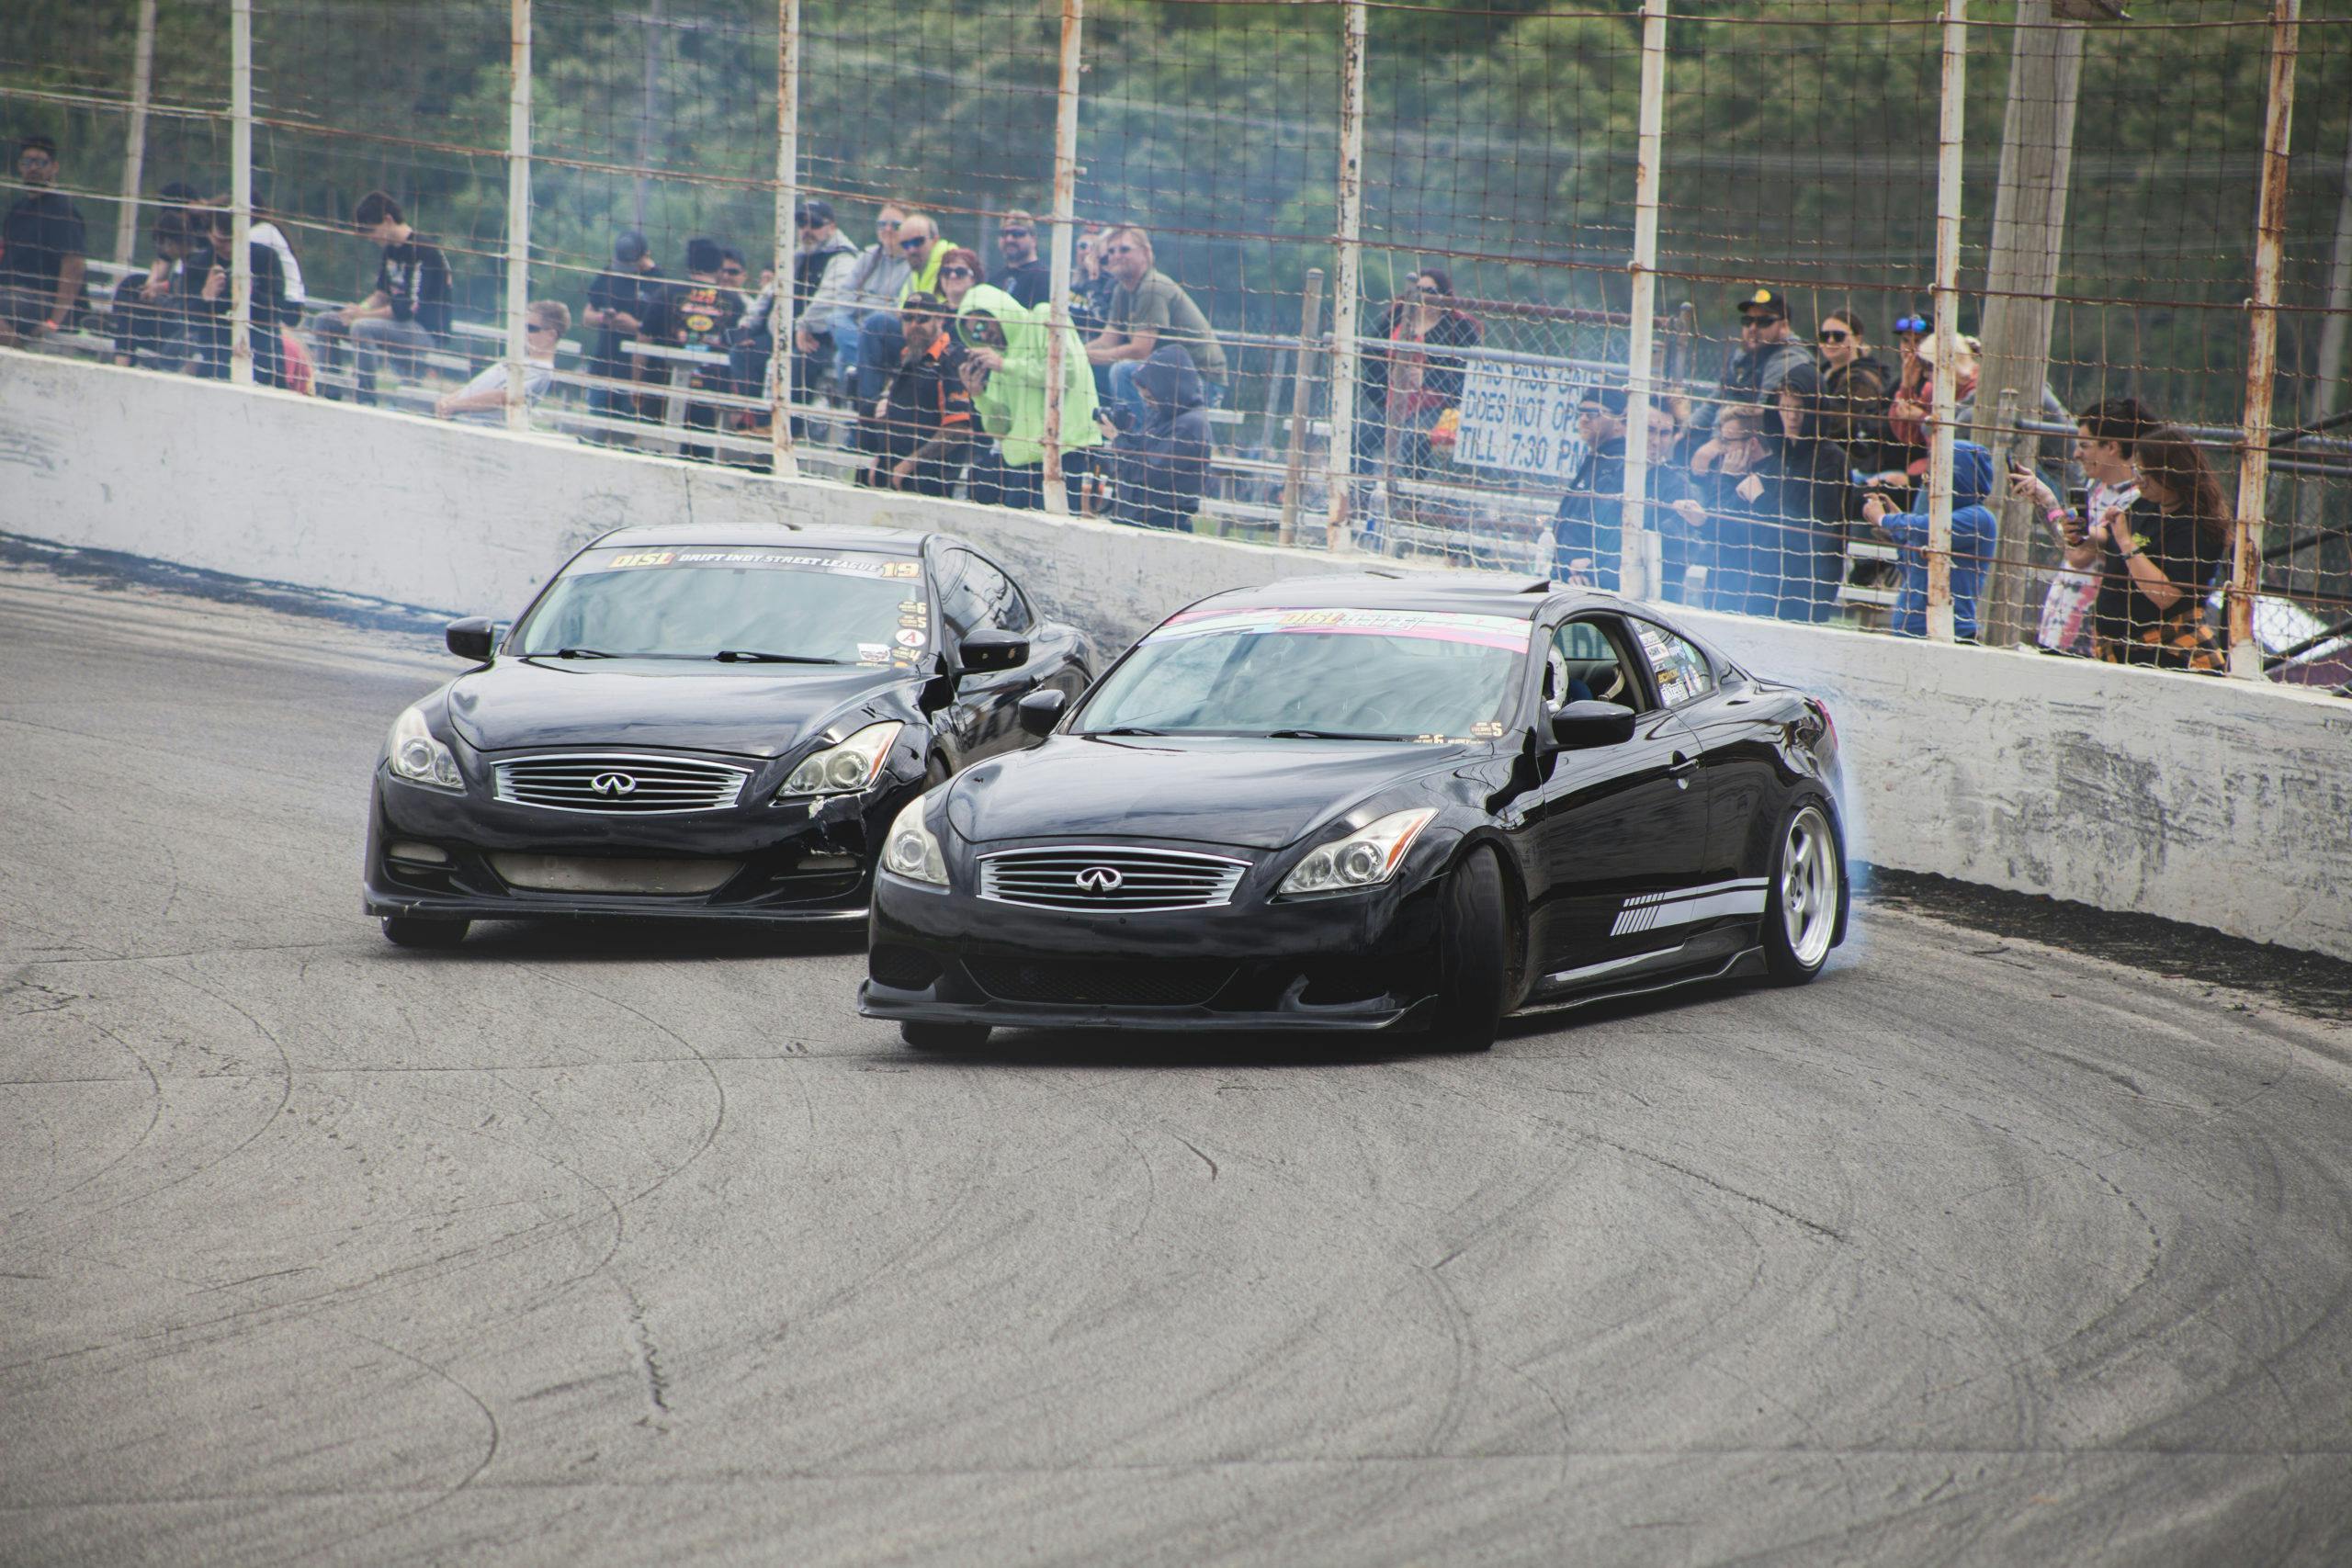 Drift Indy two dueling infinity